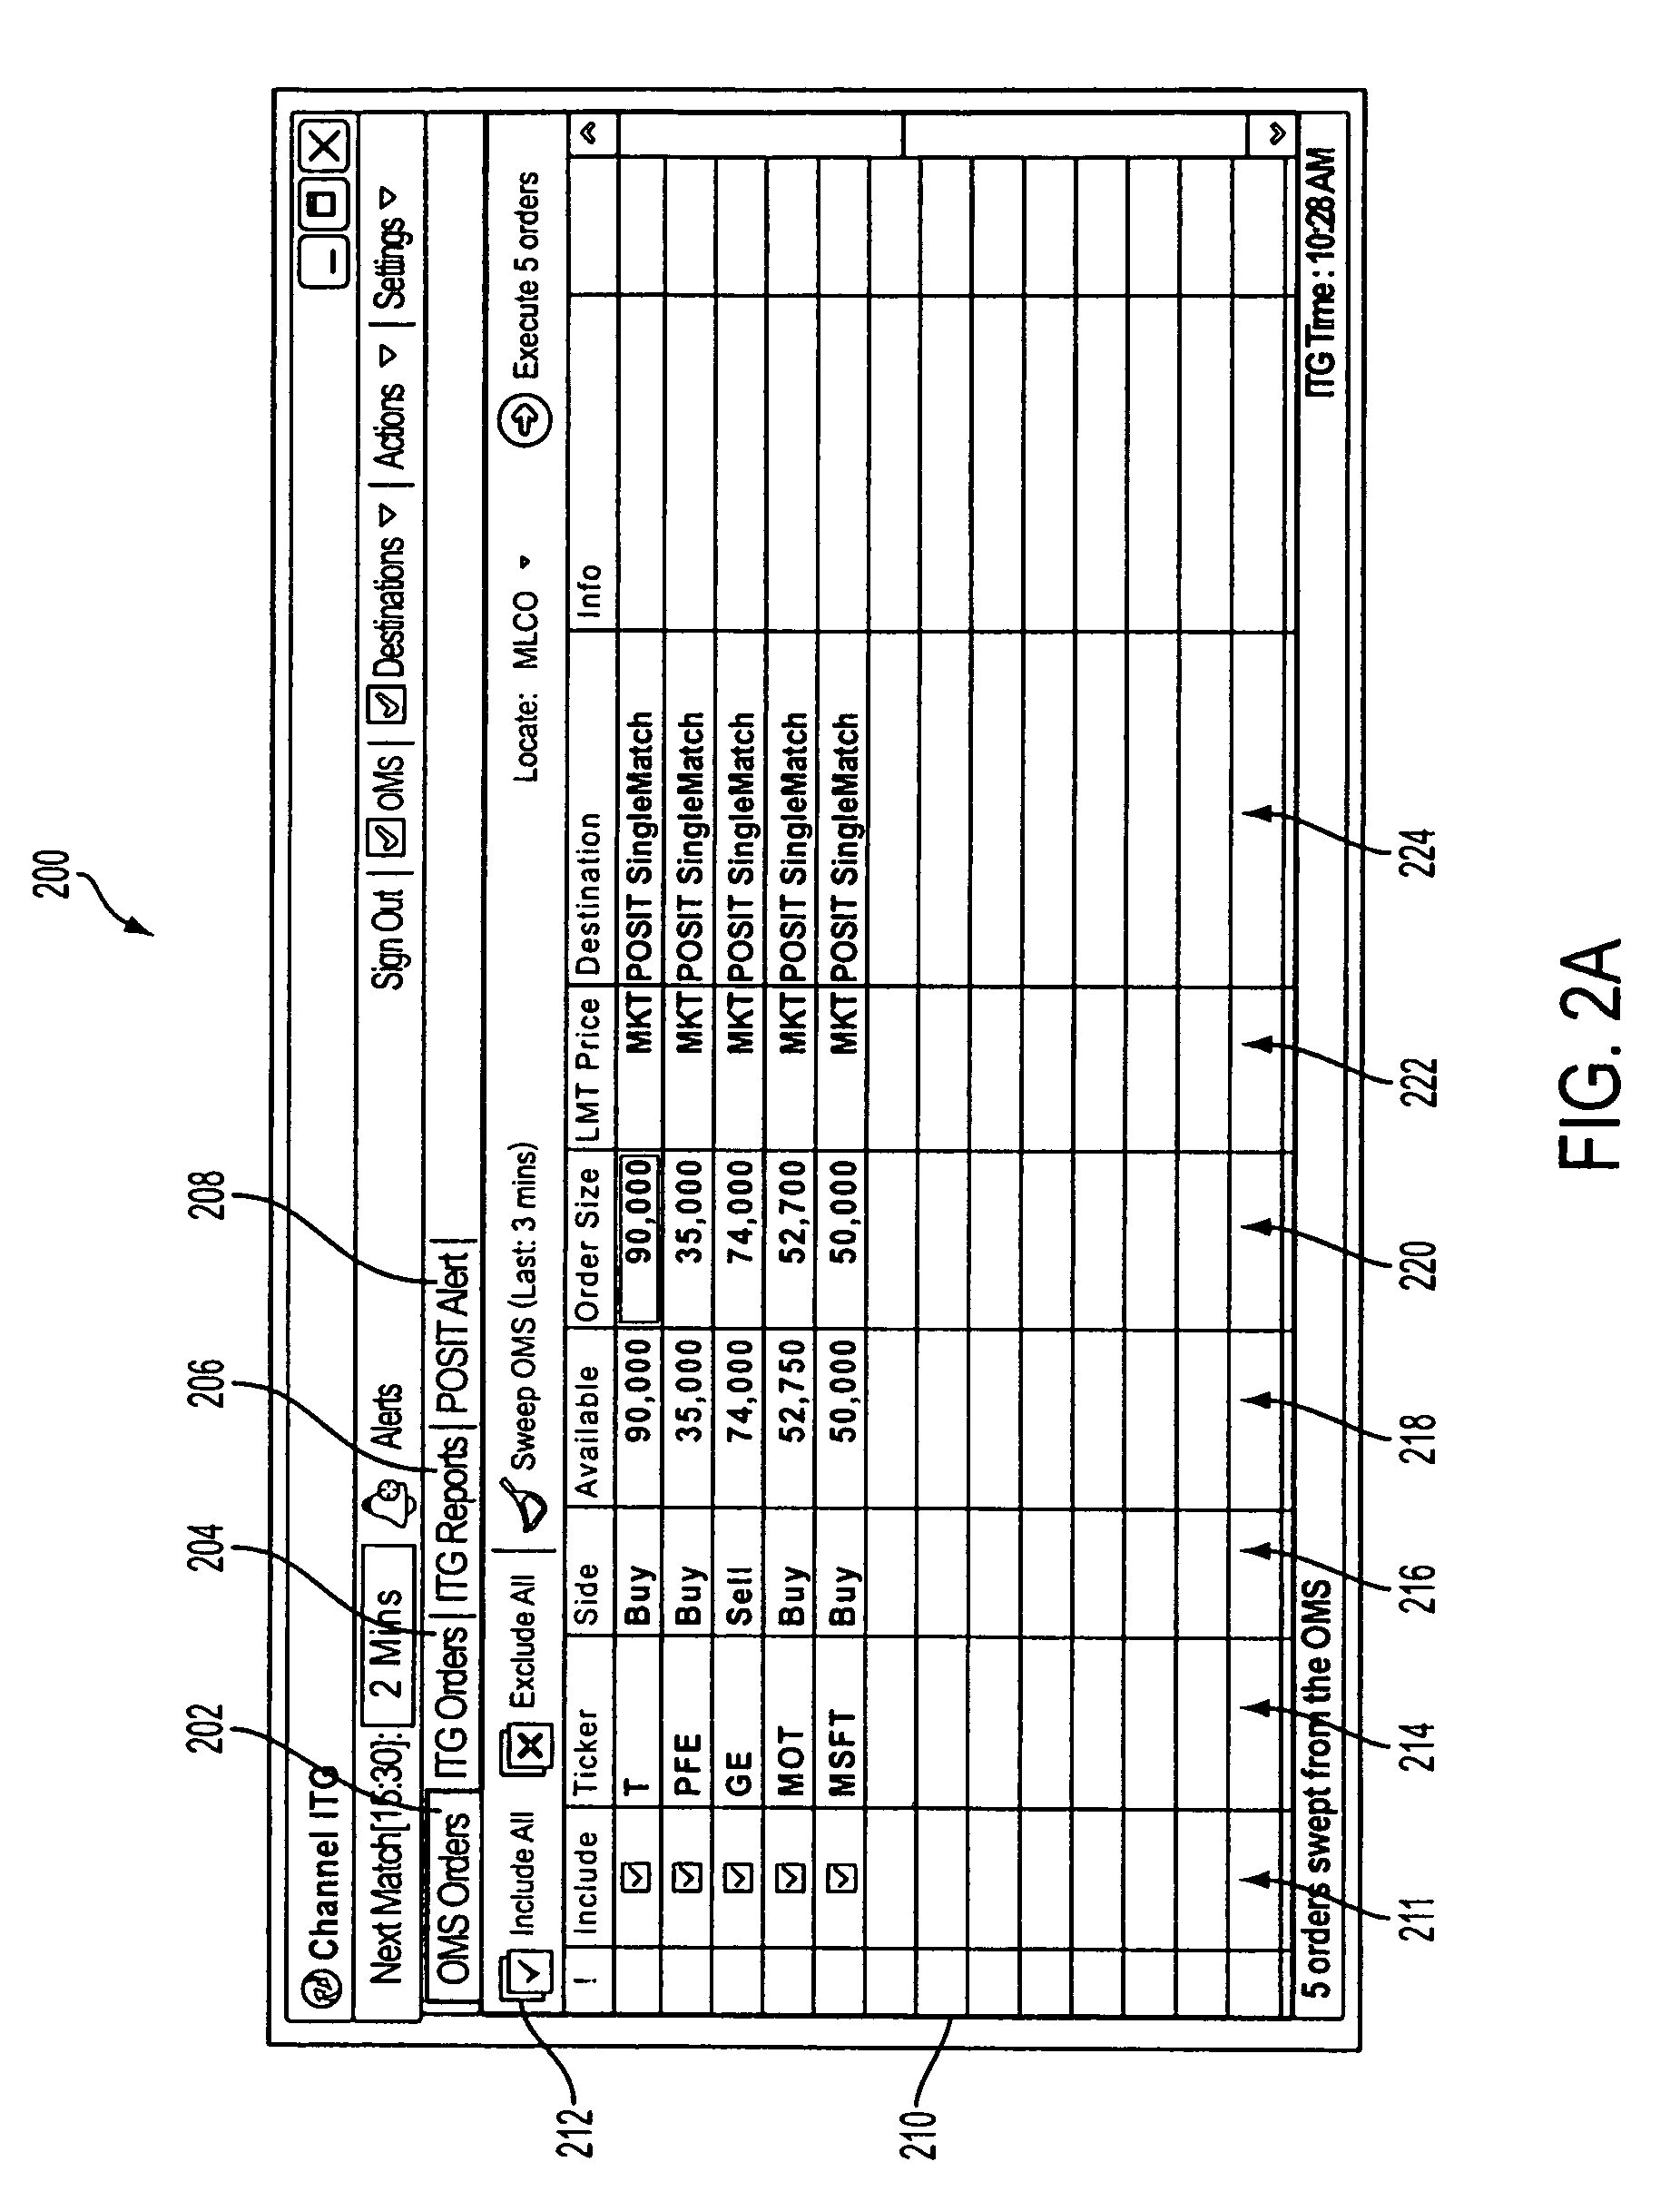 System and method for generating liquidity